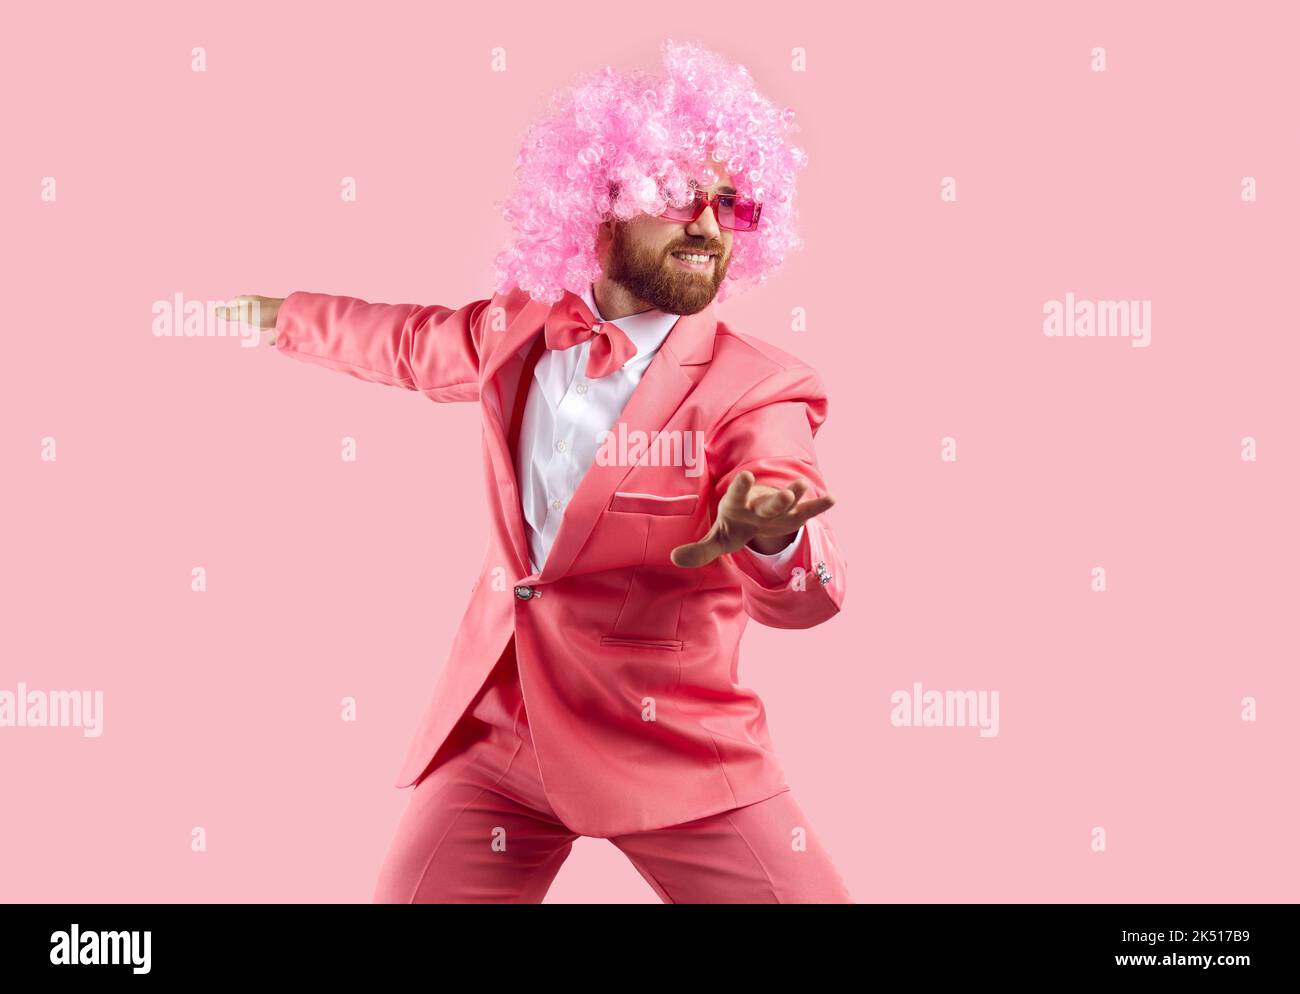 Funny bearded man in wig, glasses and suit having fun isolated on pink background. Stock Photo